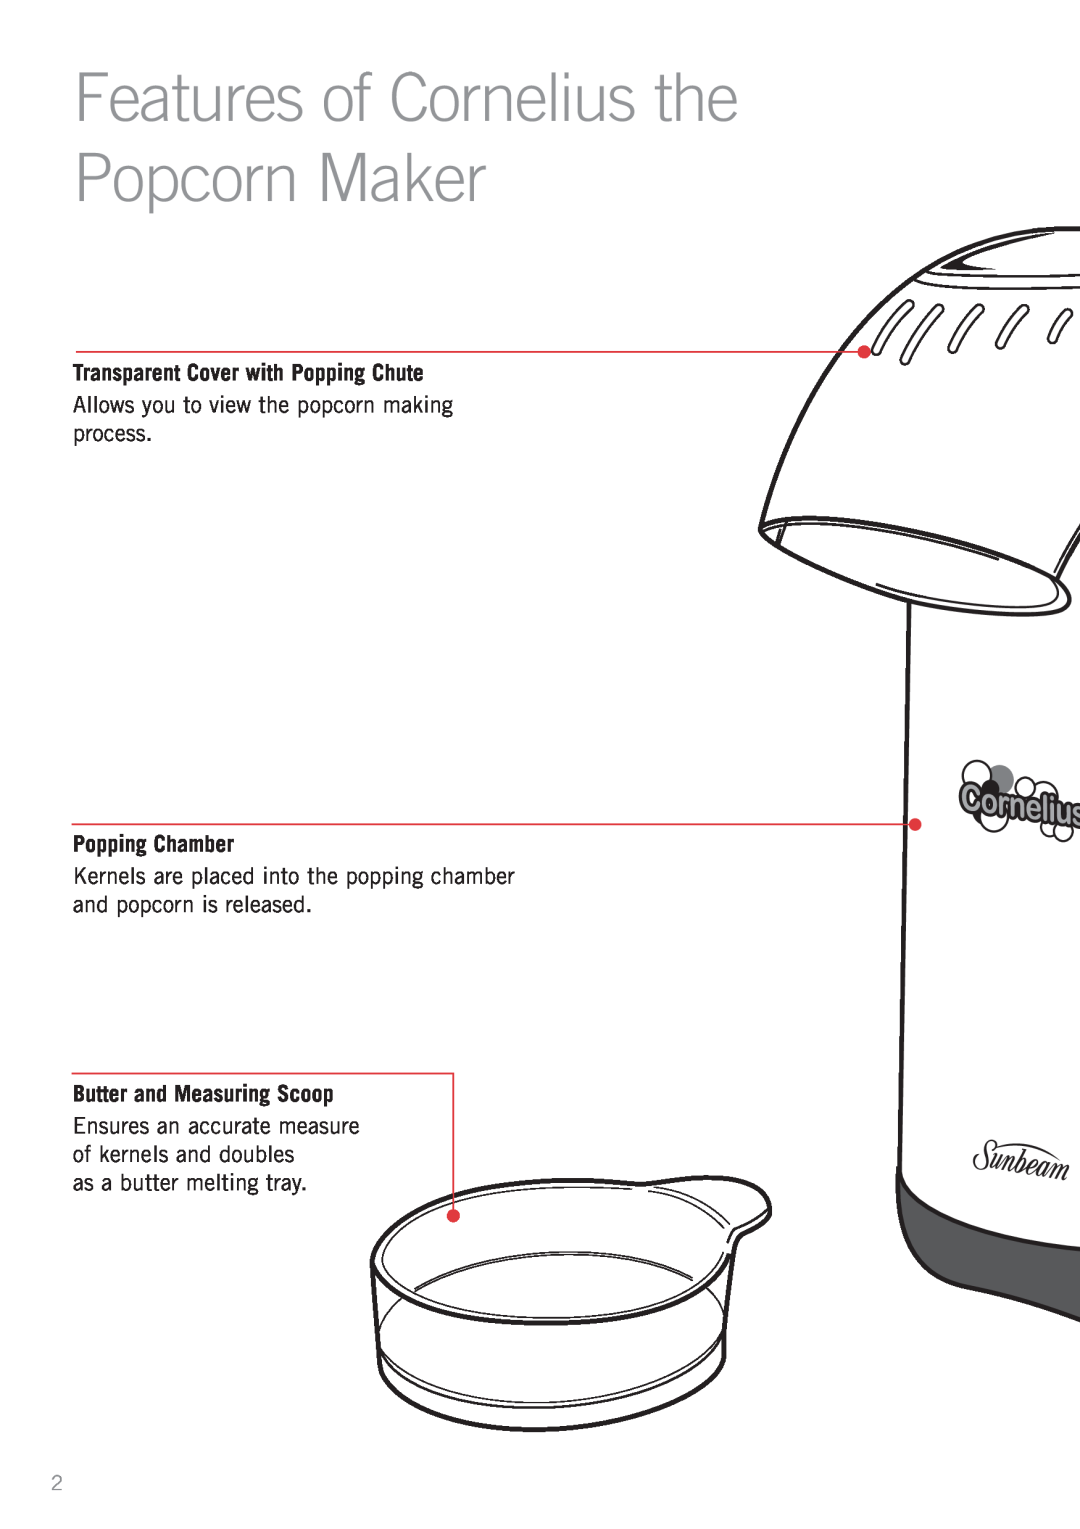 Sunbeam CP4500 manual Features of Cornelius the Popcorn Maker, Transparent Cover with Popping Chute, Popping Chamber 